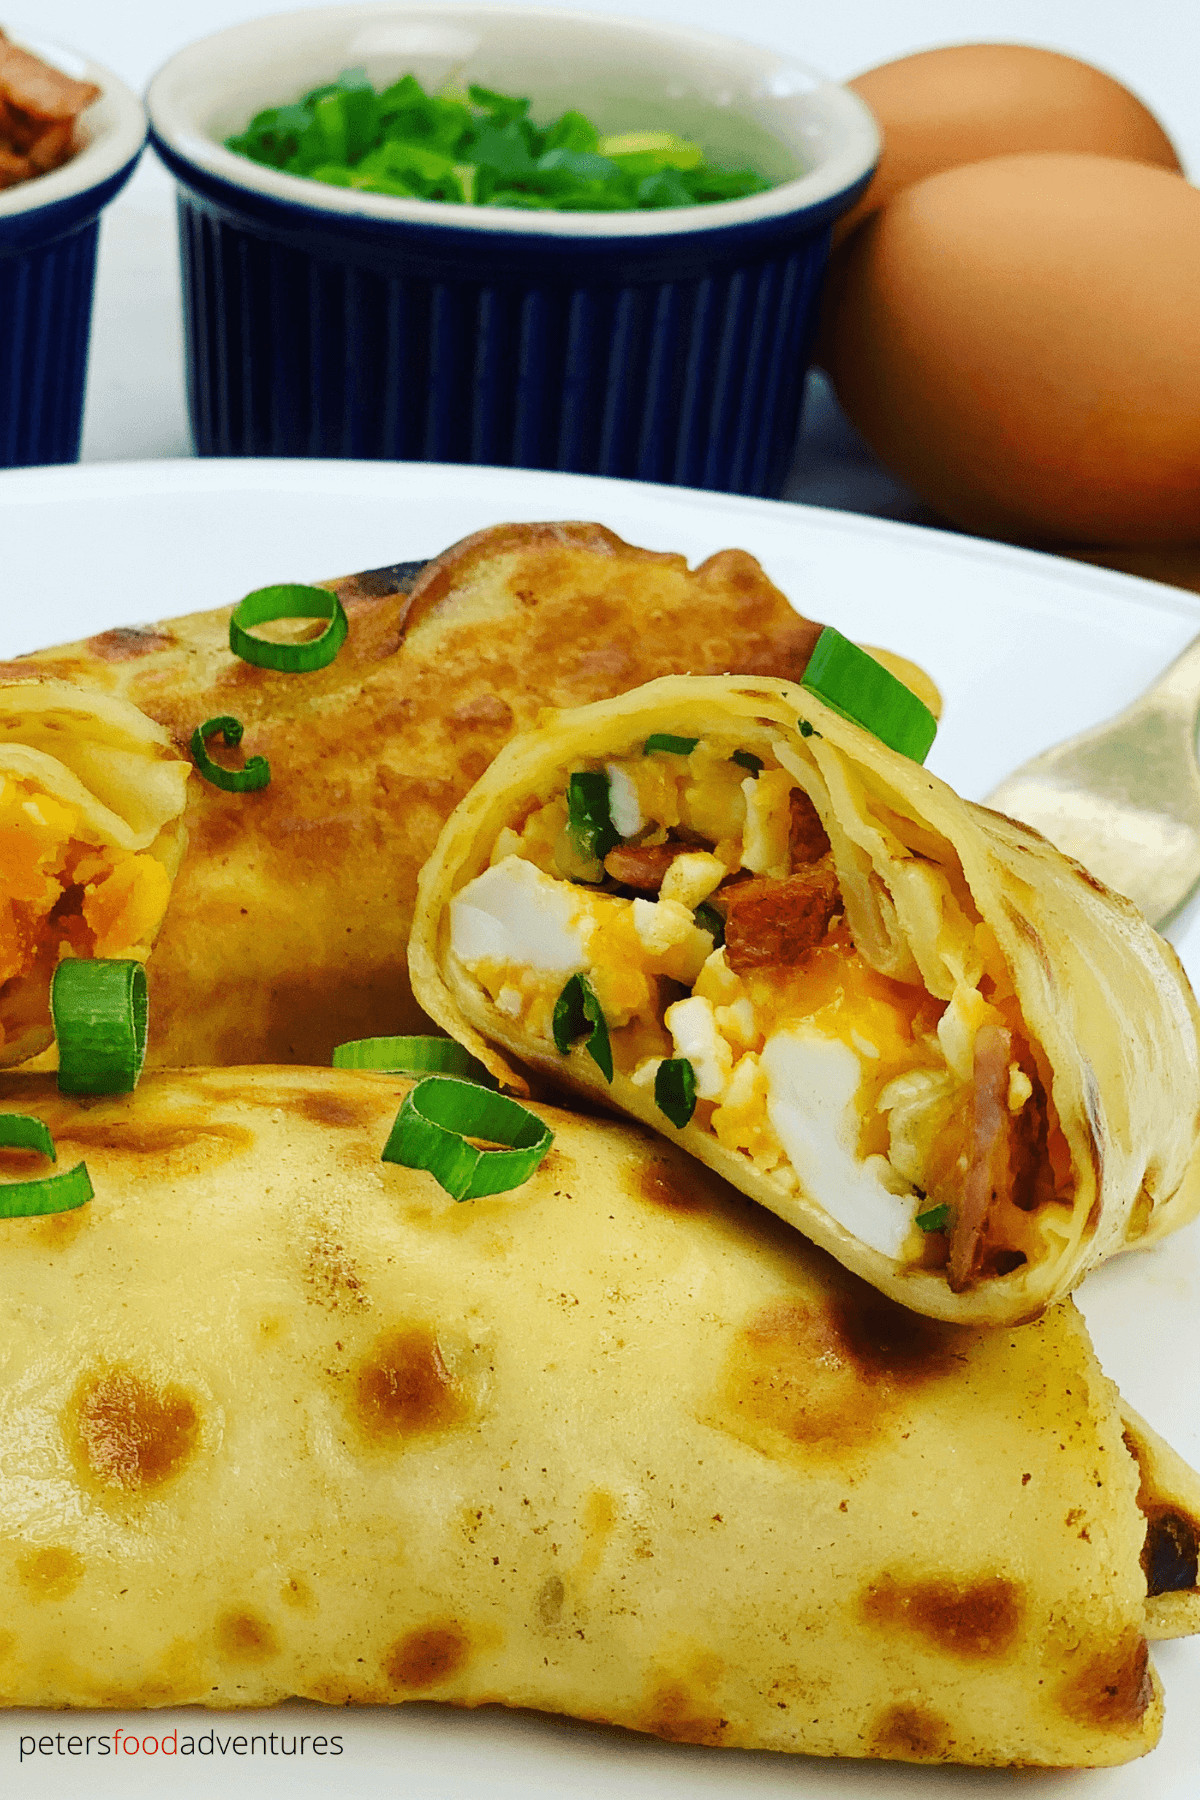 Delicious Breakfast Crepes stuffed with mediium-boiled eggs, bacon, cheese and green onions before being pan fried in butter. Generously slathered in sour cream - these savory crepes are worth the effort!